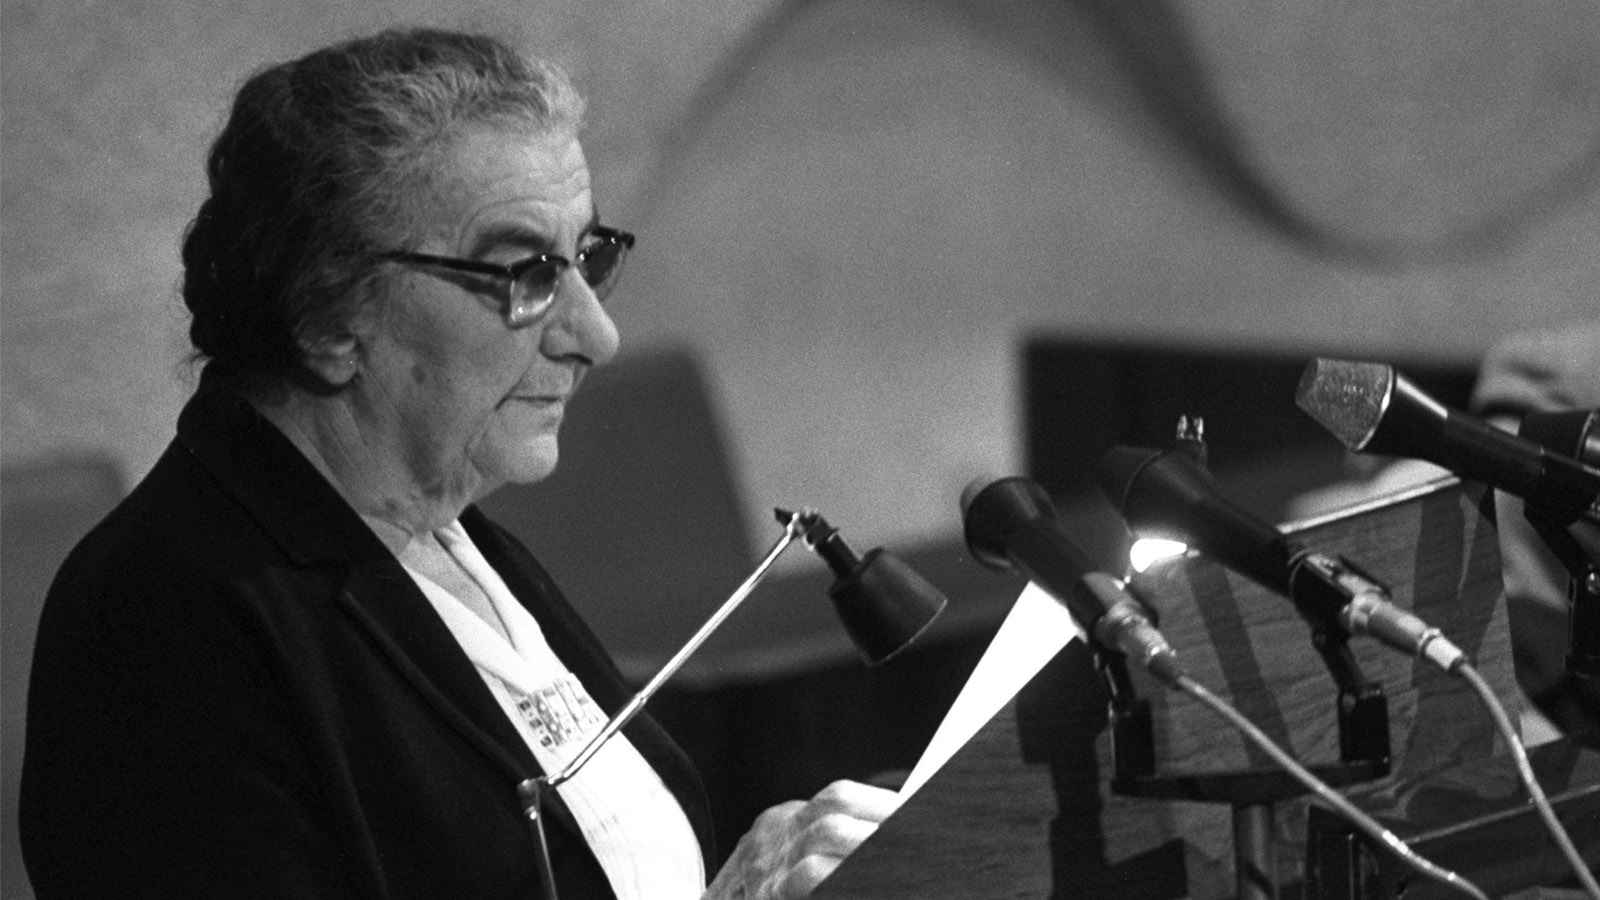 Prime Minister Golda Meir introducing the new government at a Knesset session in Jerusalem, 1974. (National Archive)